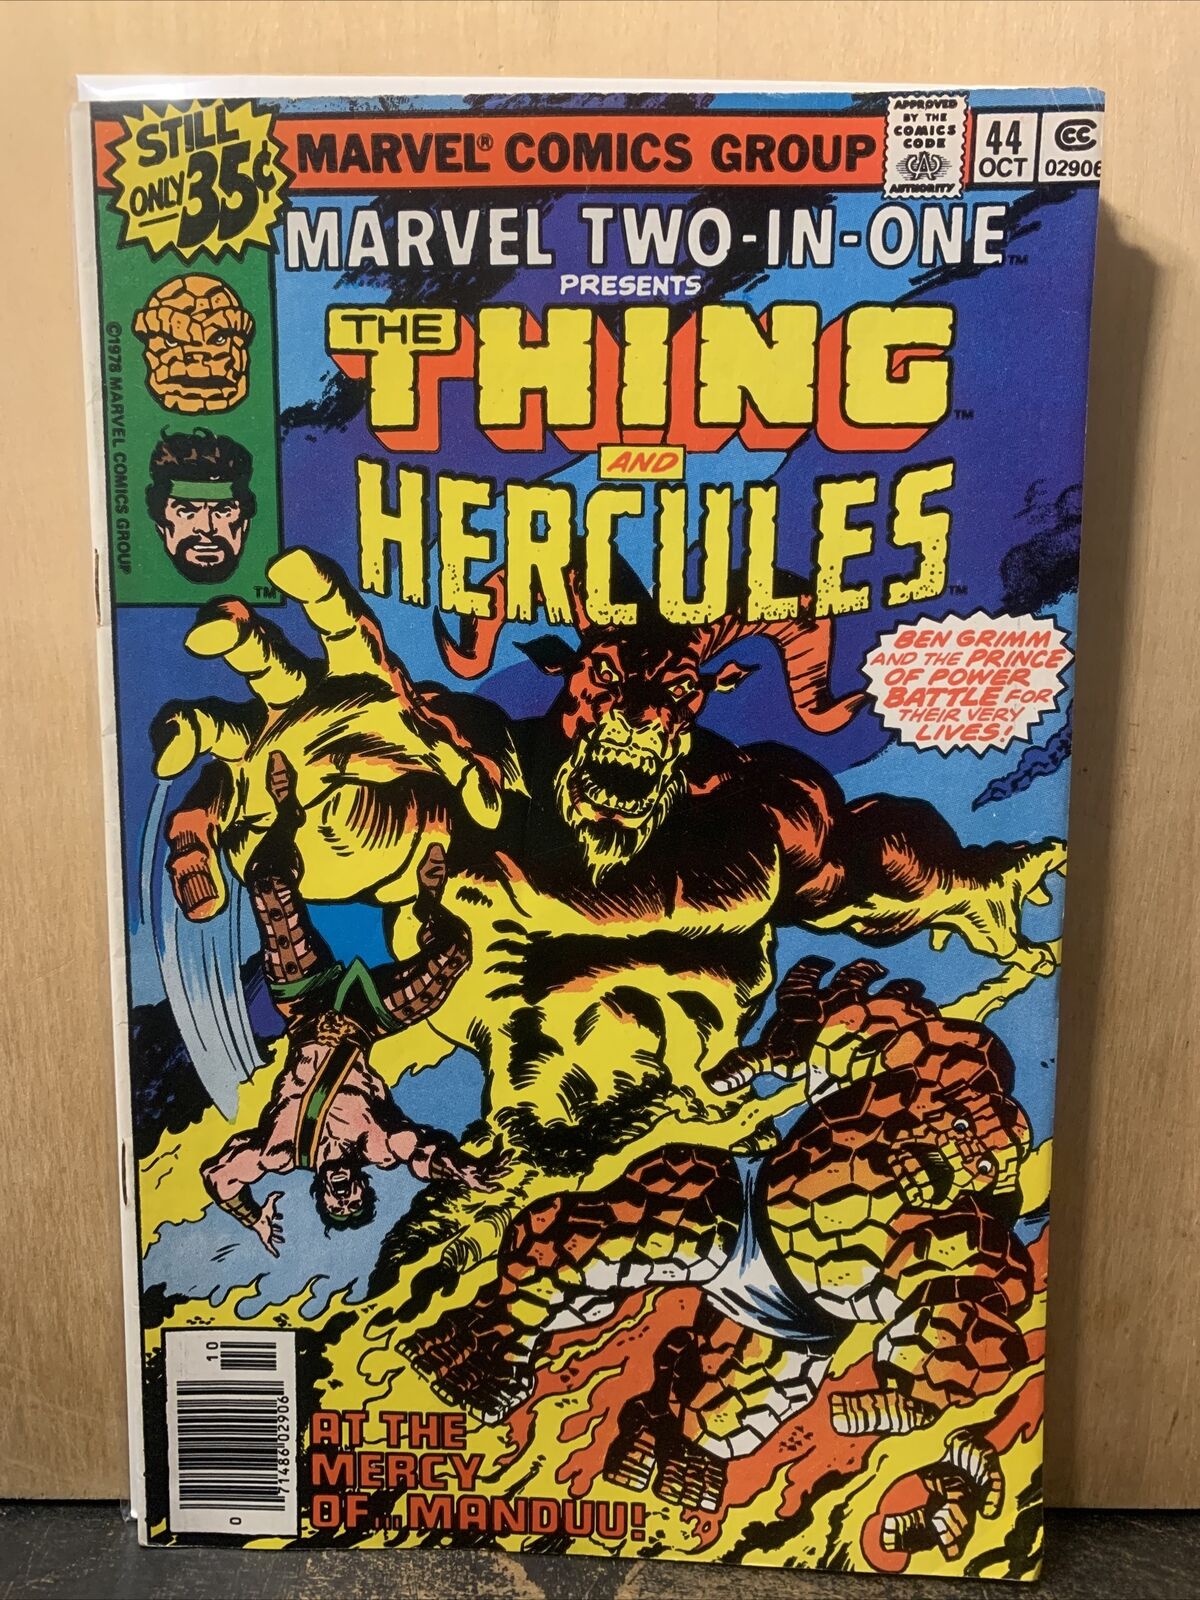 Marvel Two-In-One -The Thing & Hercules- #44 Comic Book 1978